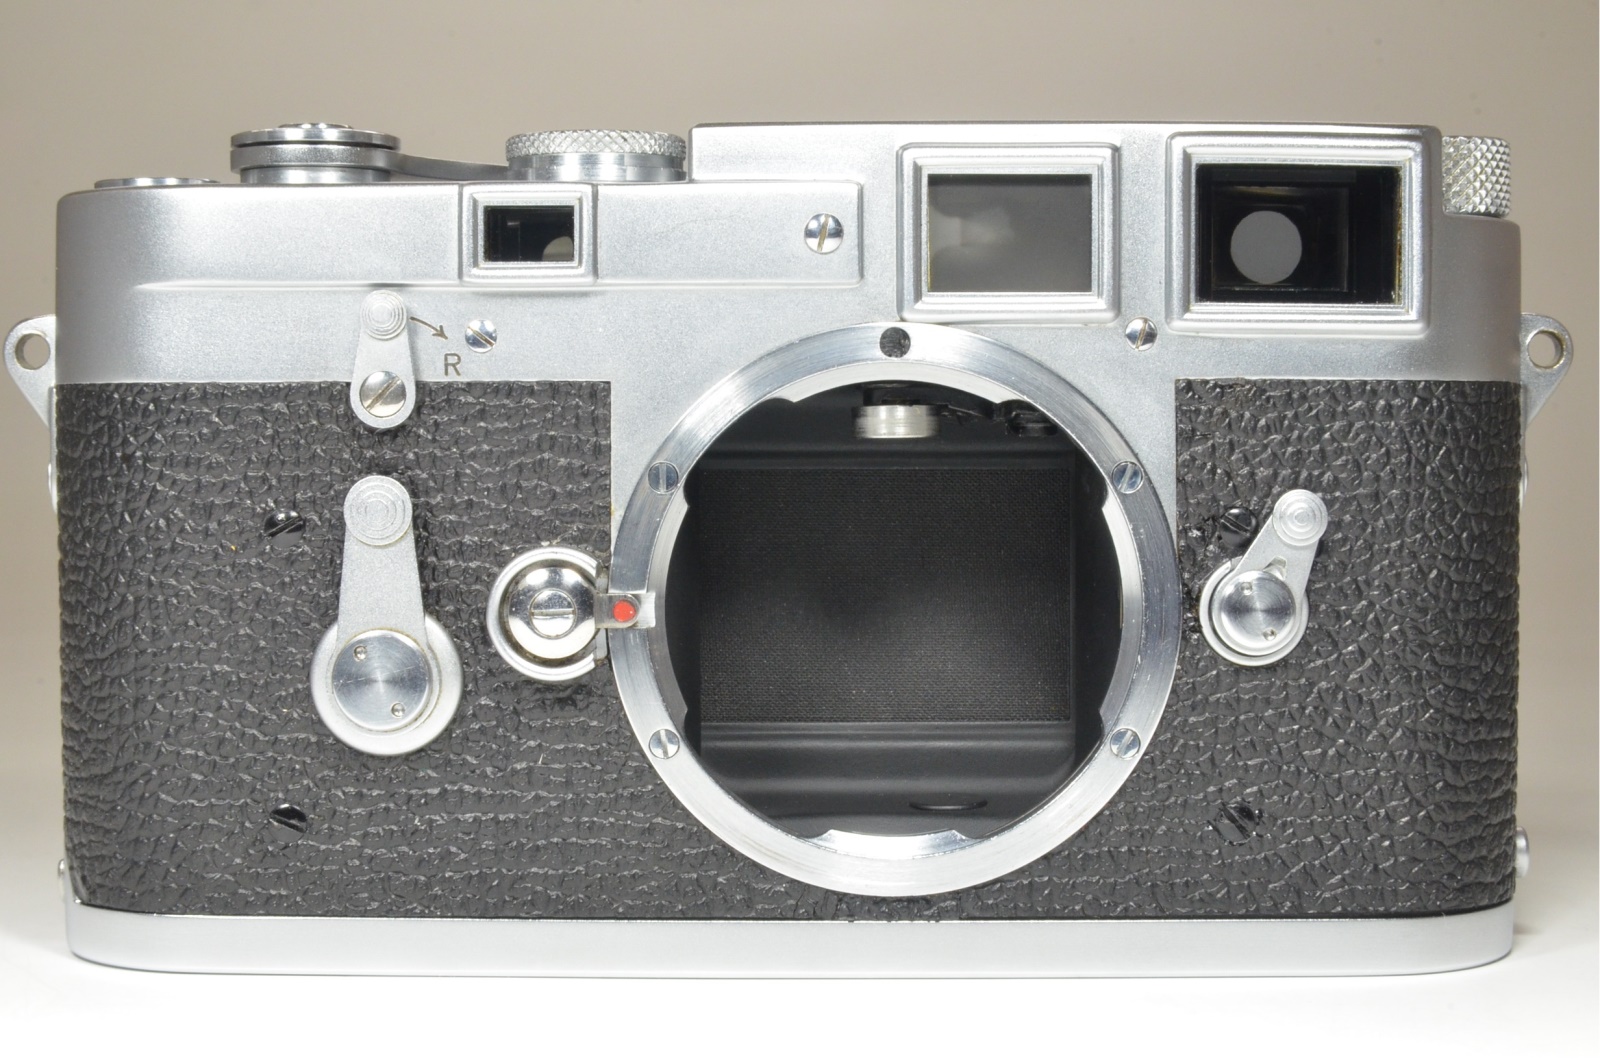 leica m3 double stroke s/n 758390 year 1955 the camera cla'd recently